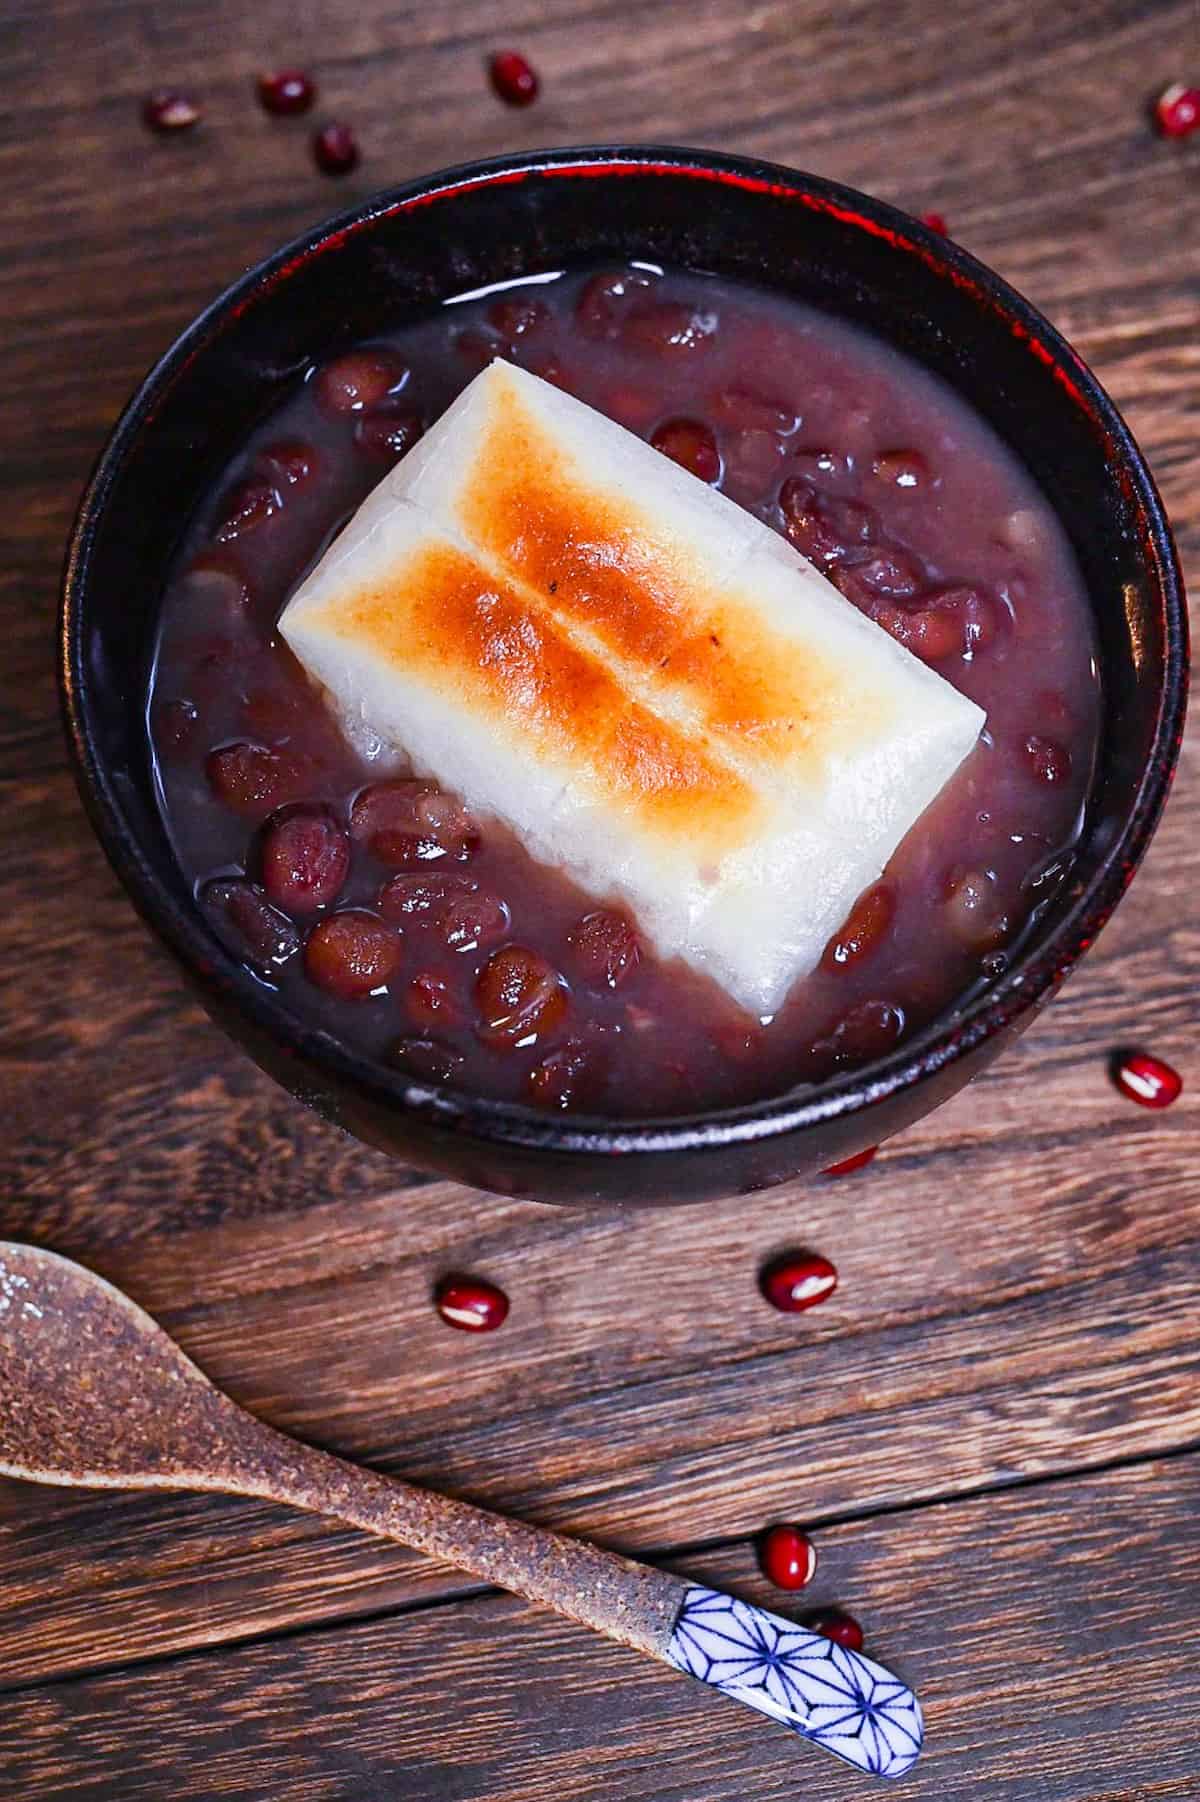 Zenzai (Japanese red bean soup) served in a black bowl and topped with toasted kirimochi